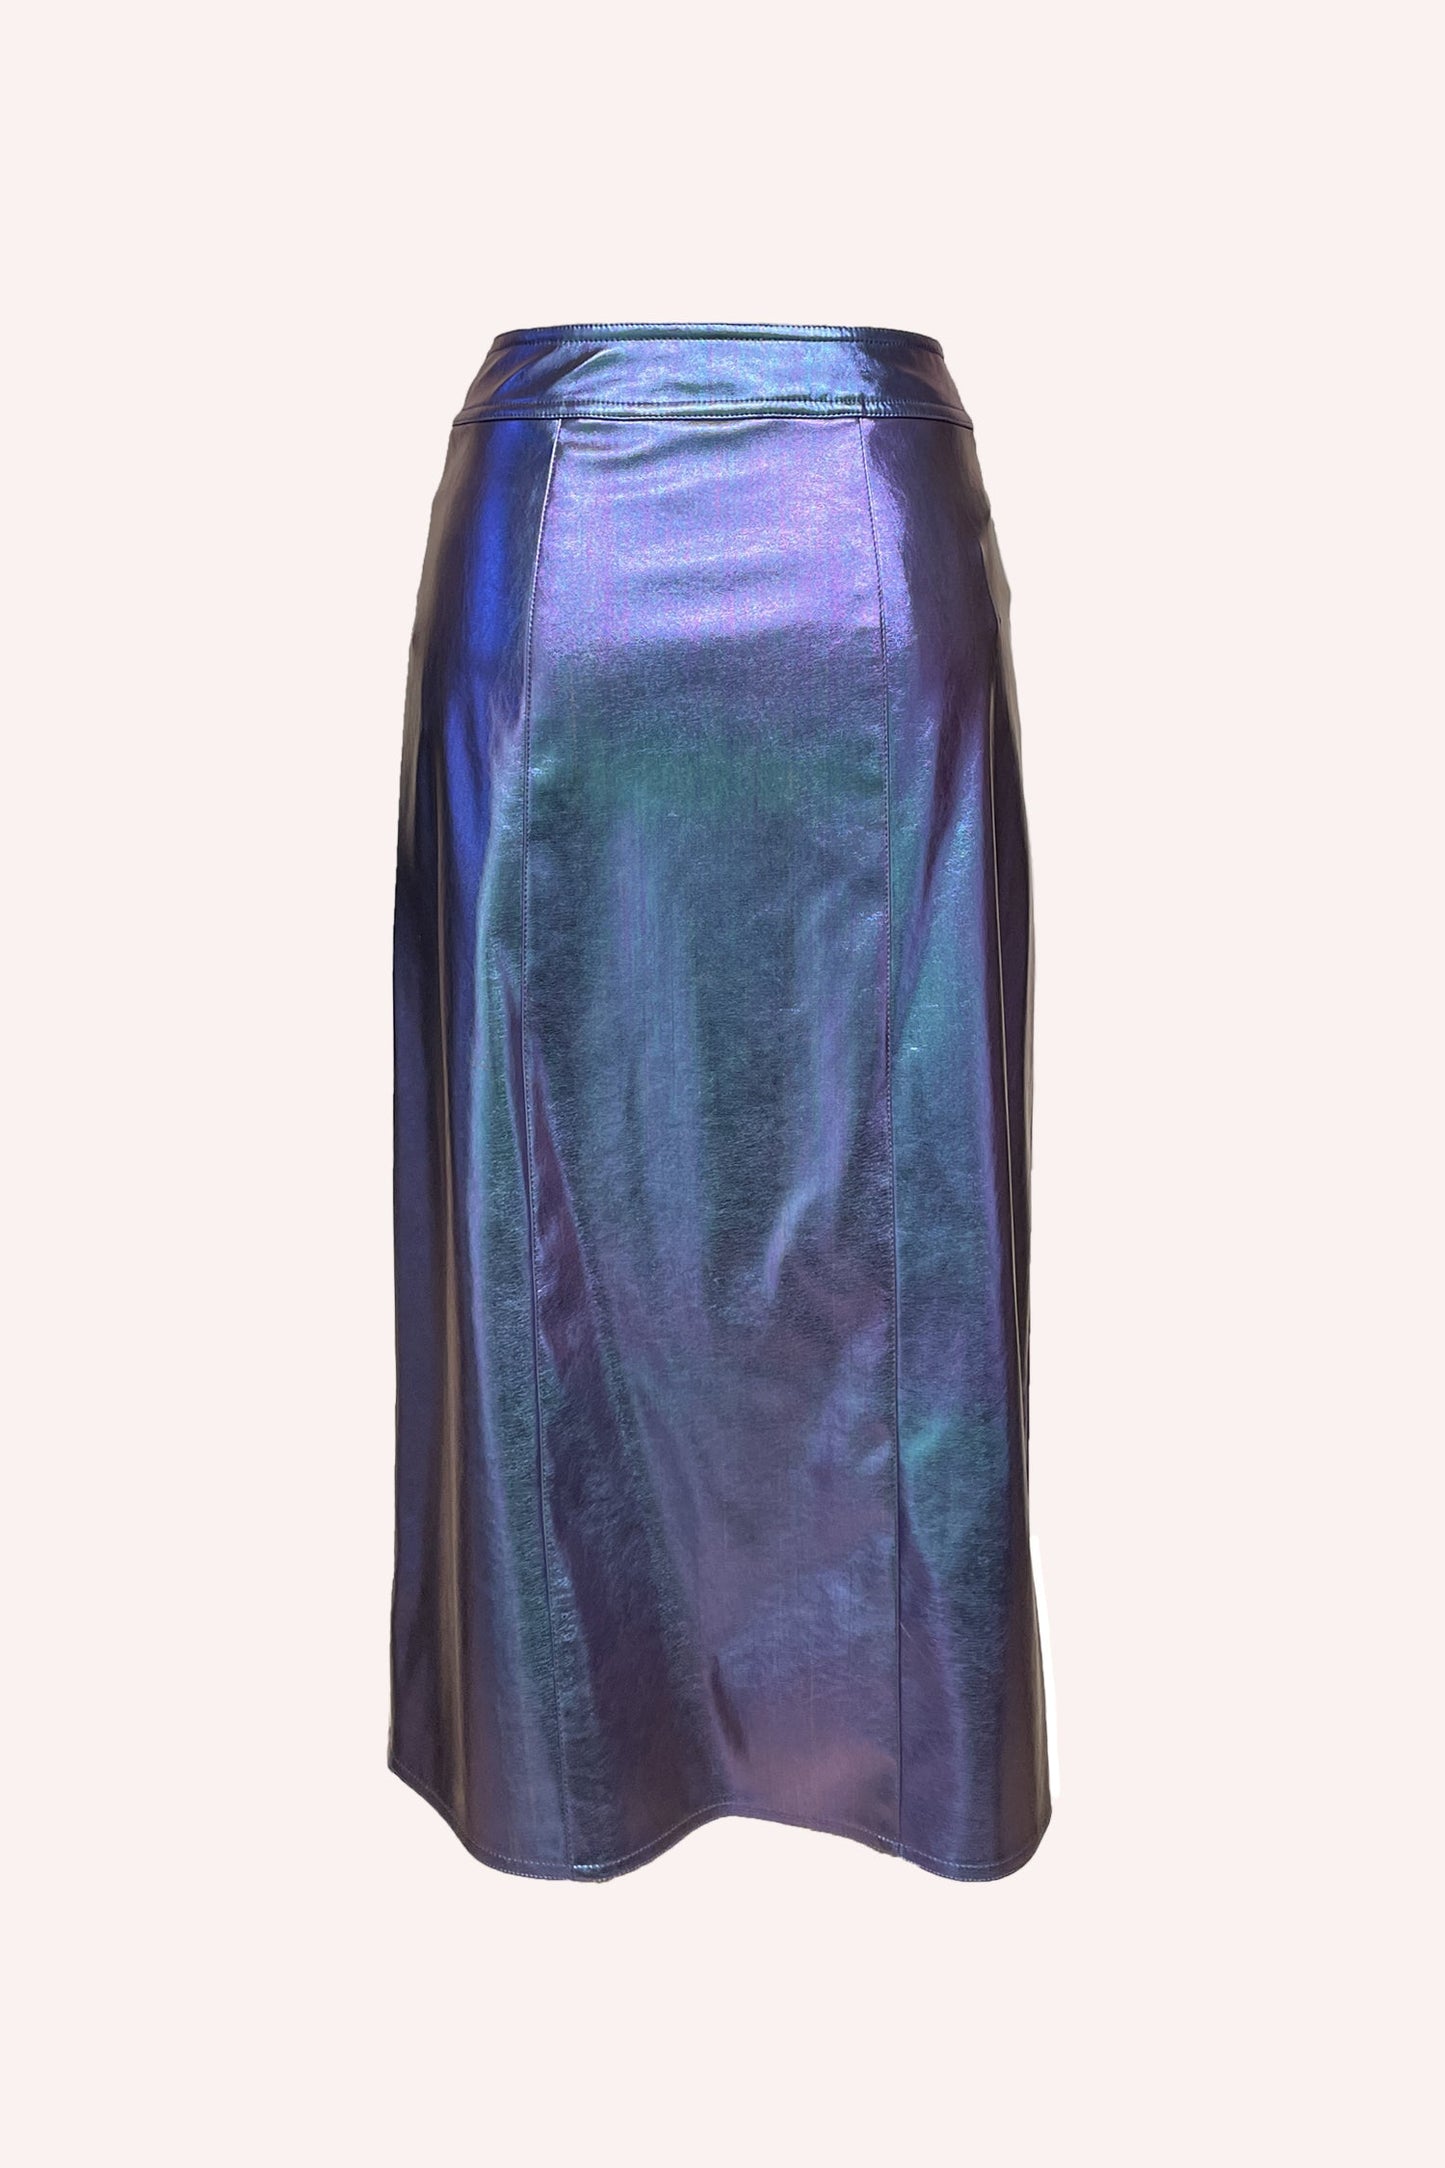 Metallic Faux Leather Skirt, in a hue of blue, fitted pencil skirt